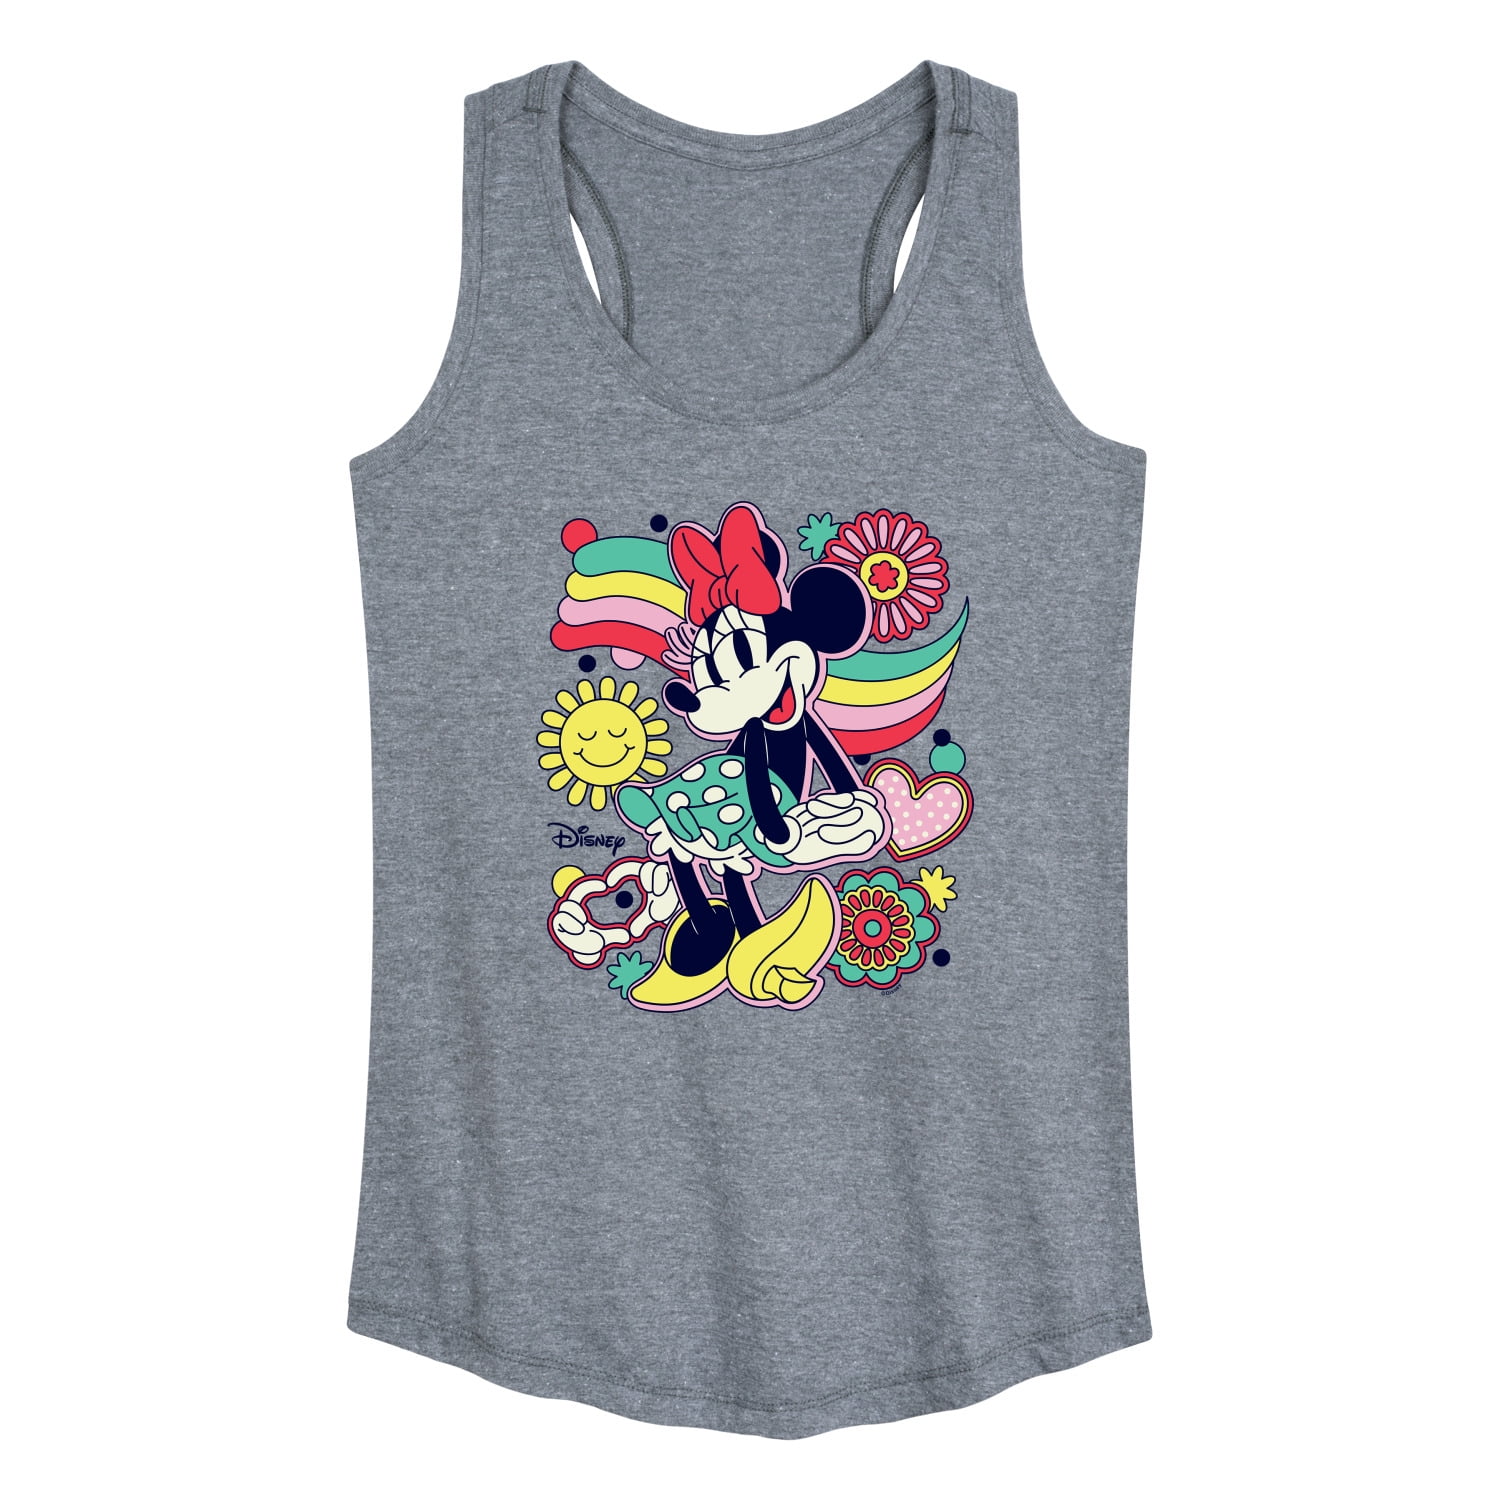 Disney - Mickey & Friends - Minnie Mouse - Happiness - Women's